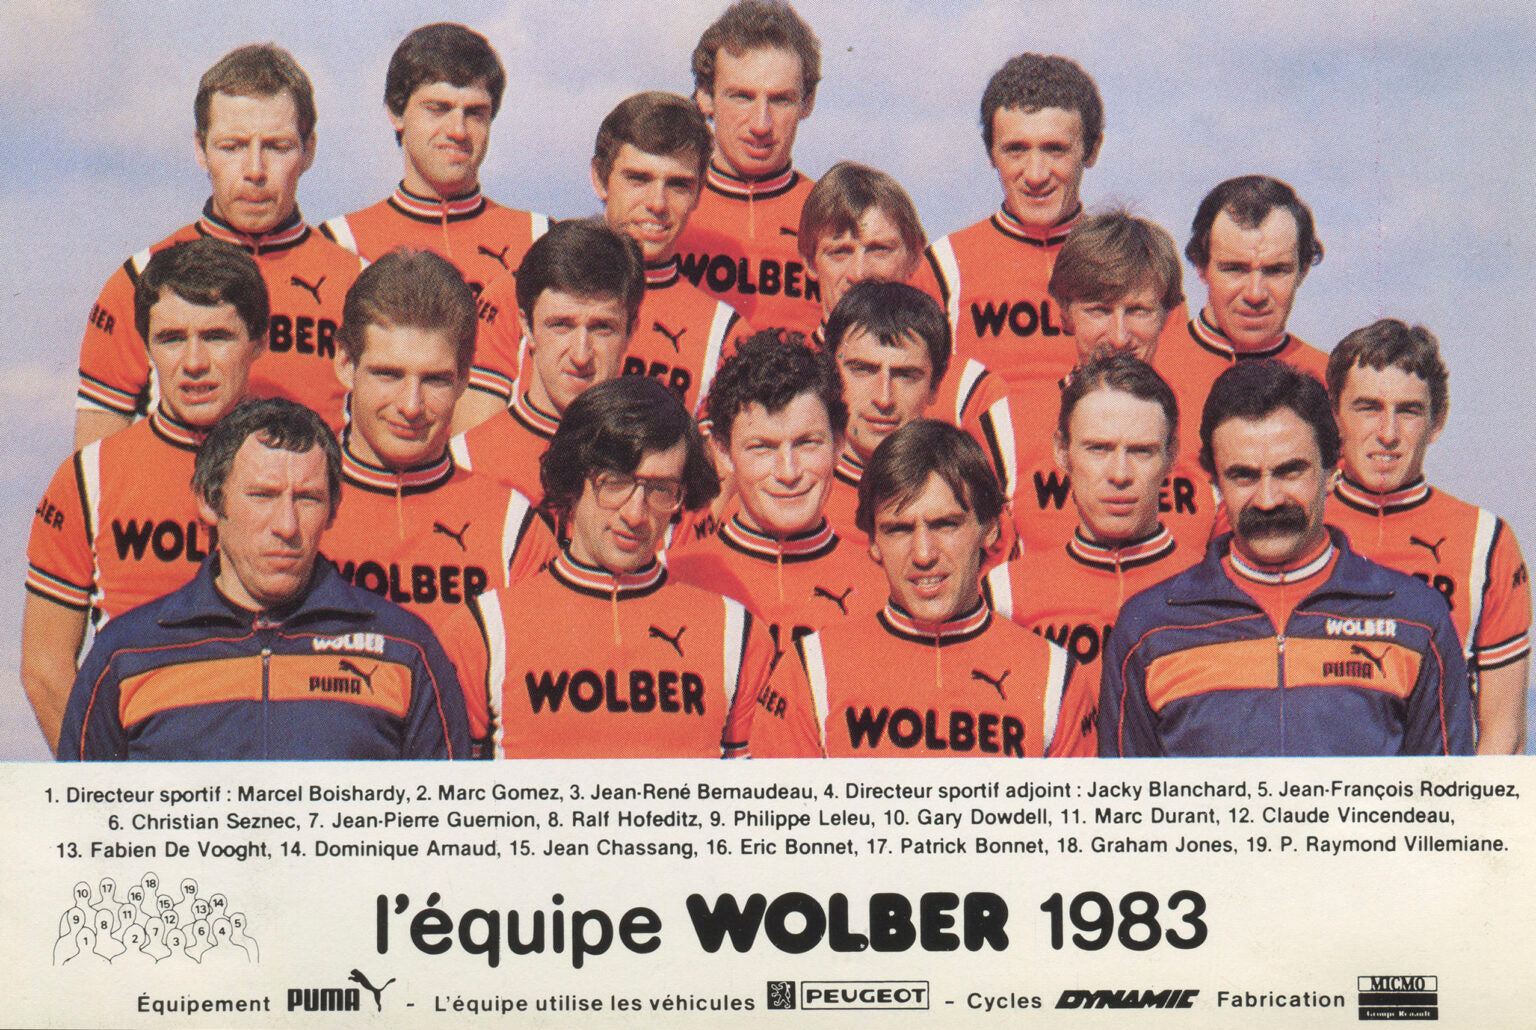 Wobler Cycling Team